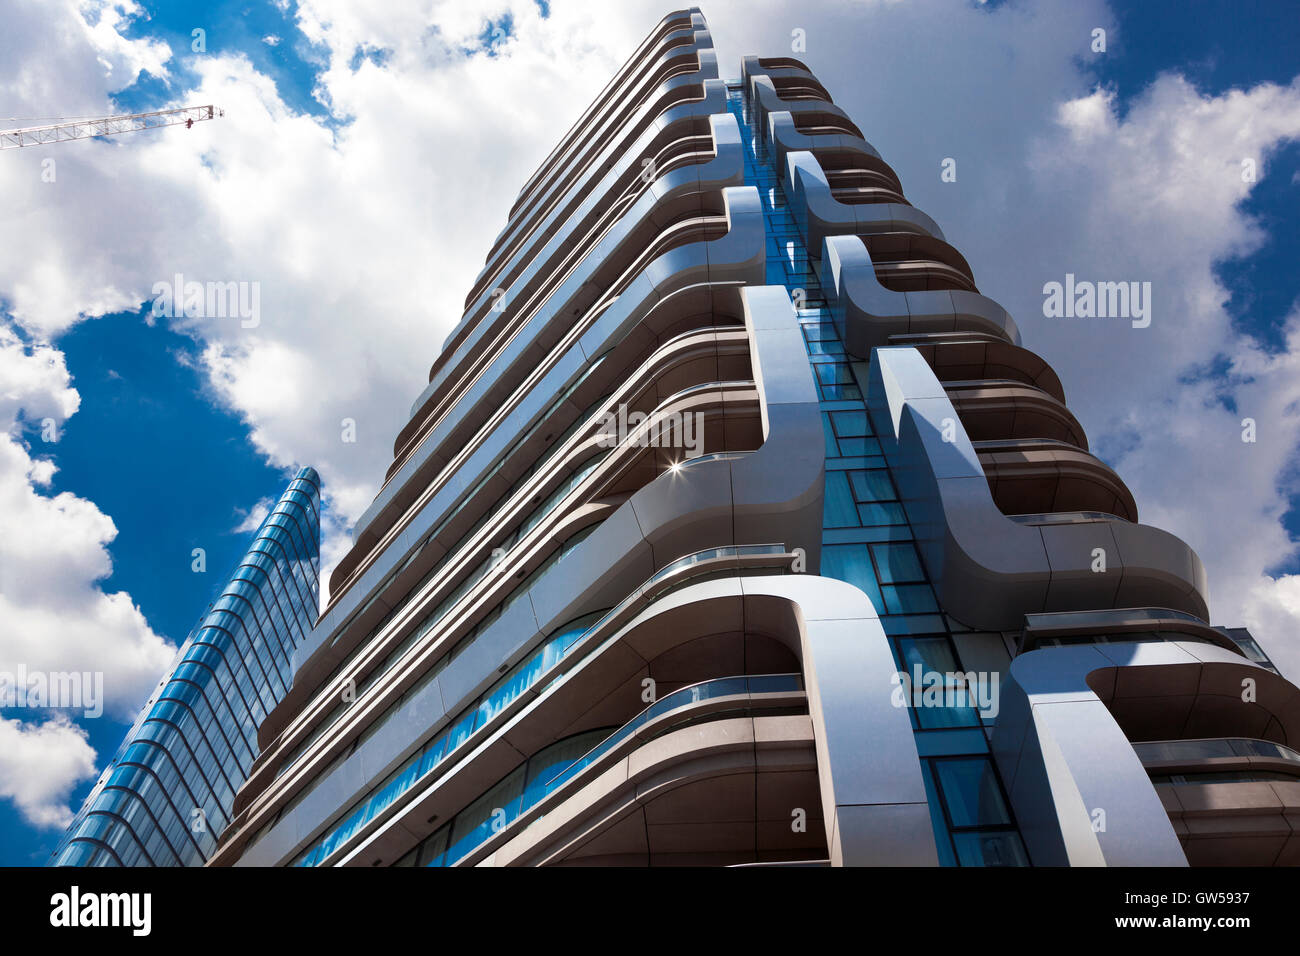 Modern residential high-rise (new developments - Lexicon and Canaletto in Old Street, London, UK) Stock Photo